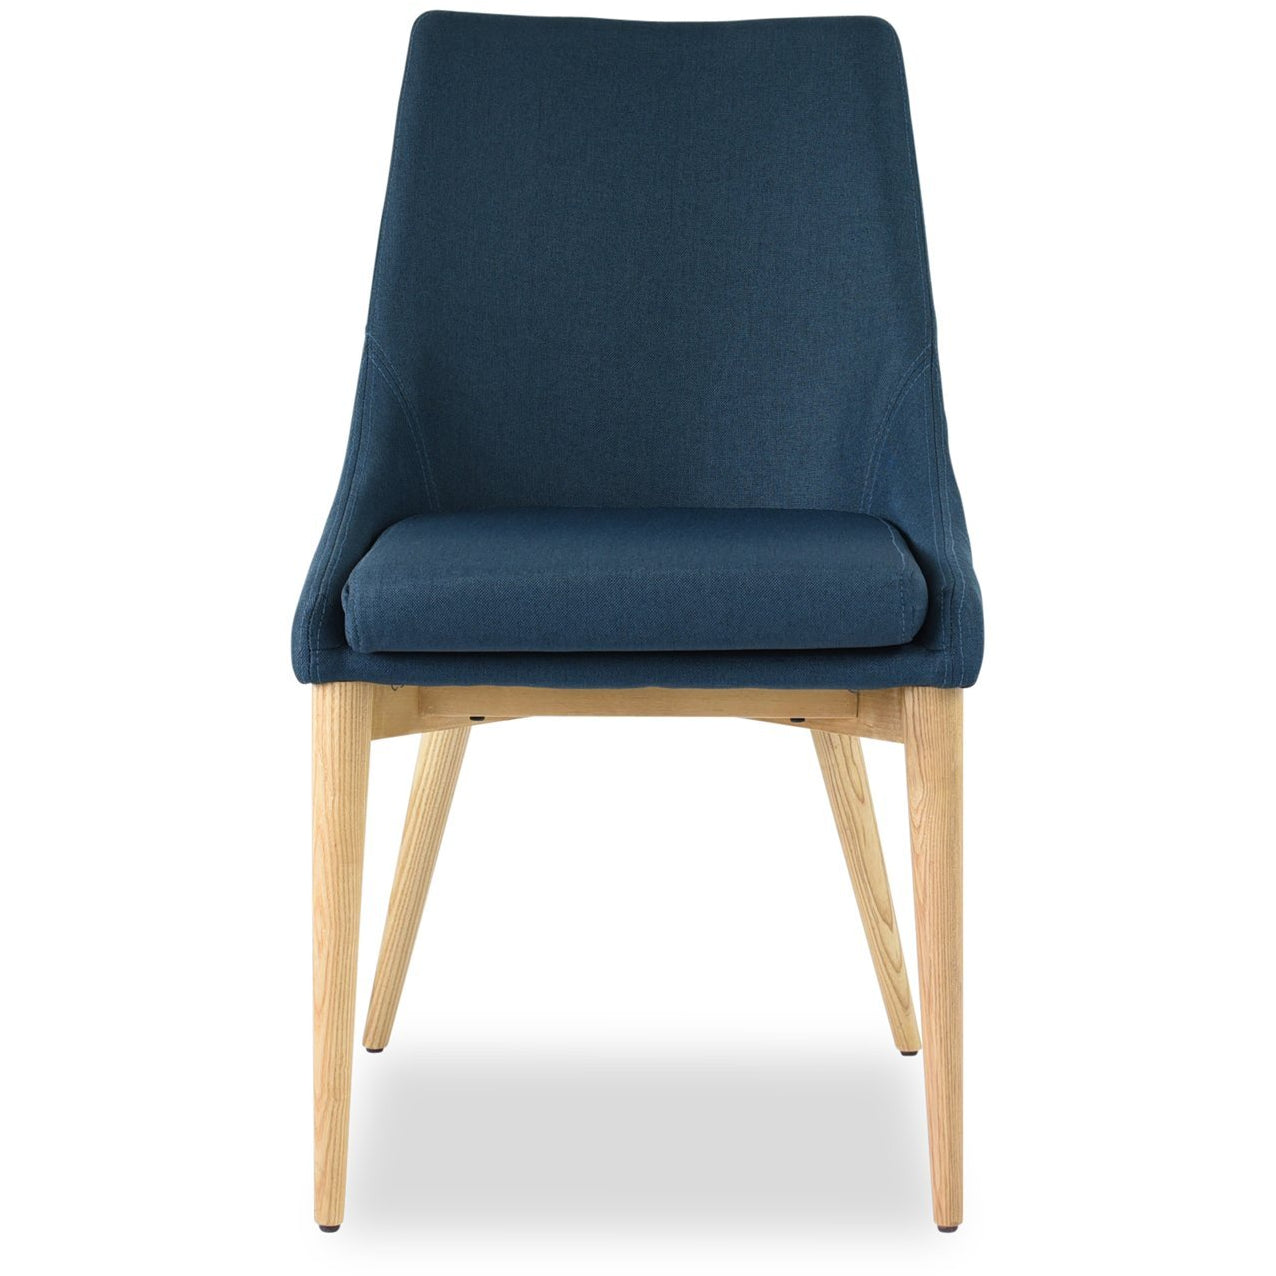 Edloe Finch Jessica Contemporary Dining Chair in Blue, Set of 2